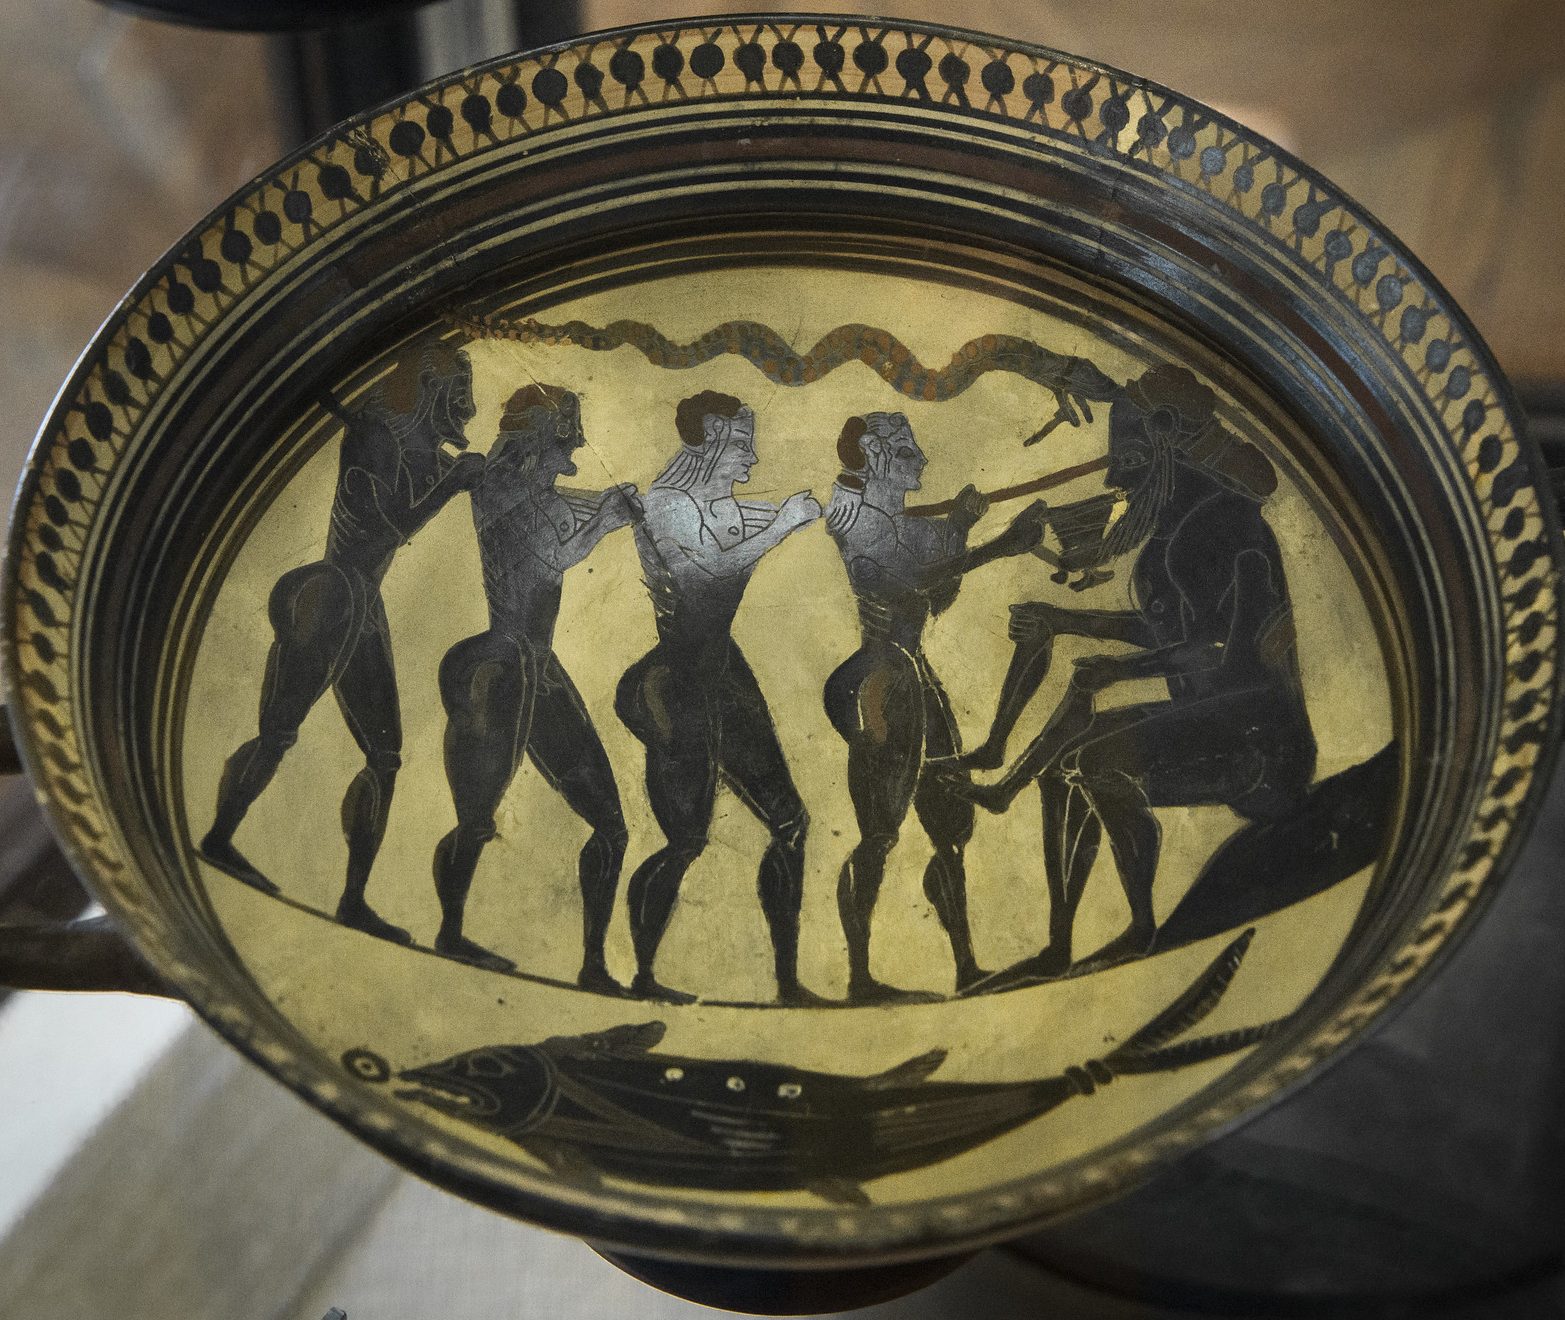 Odysseus and three of his crew, all nude men with long hair. Odysseus holds a stick and holds out a pitcher of wine of Polyphemus. Polyphemus is seated and holds two human legs as he drinks the wine. Odysseus' crew carry a large stick between them. A snake is above the scene, and a large fish below.